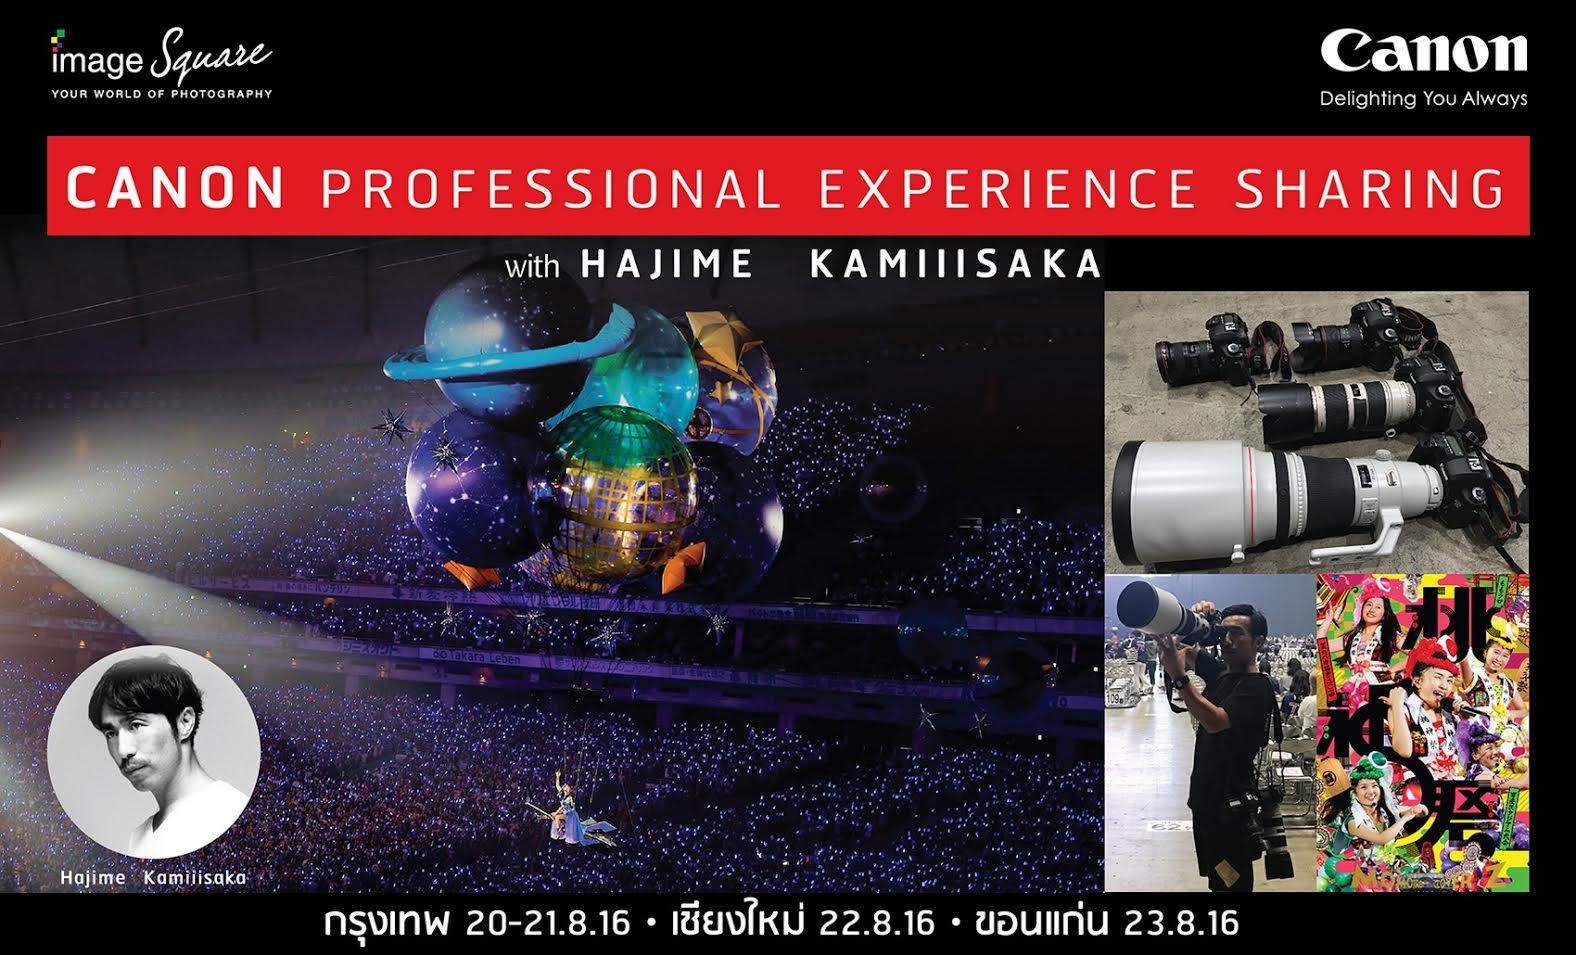 Canon Professional Photography Workshop